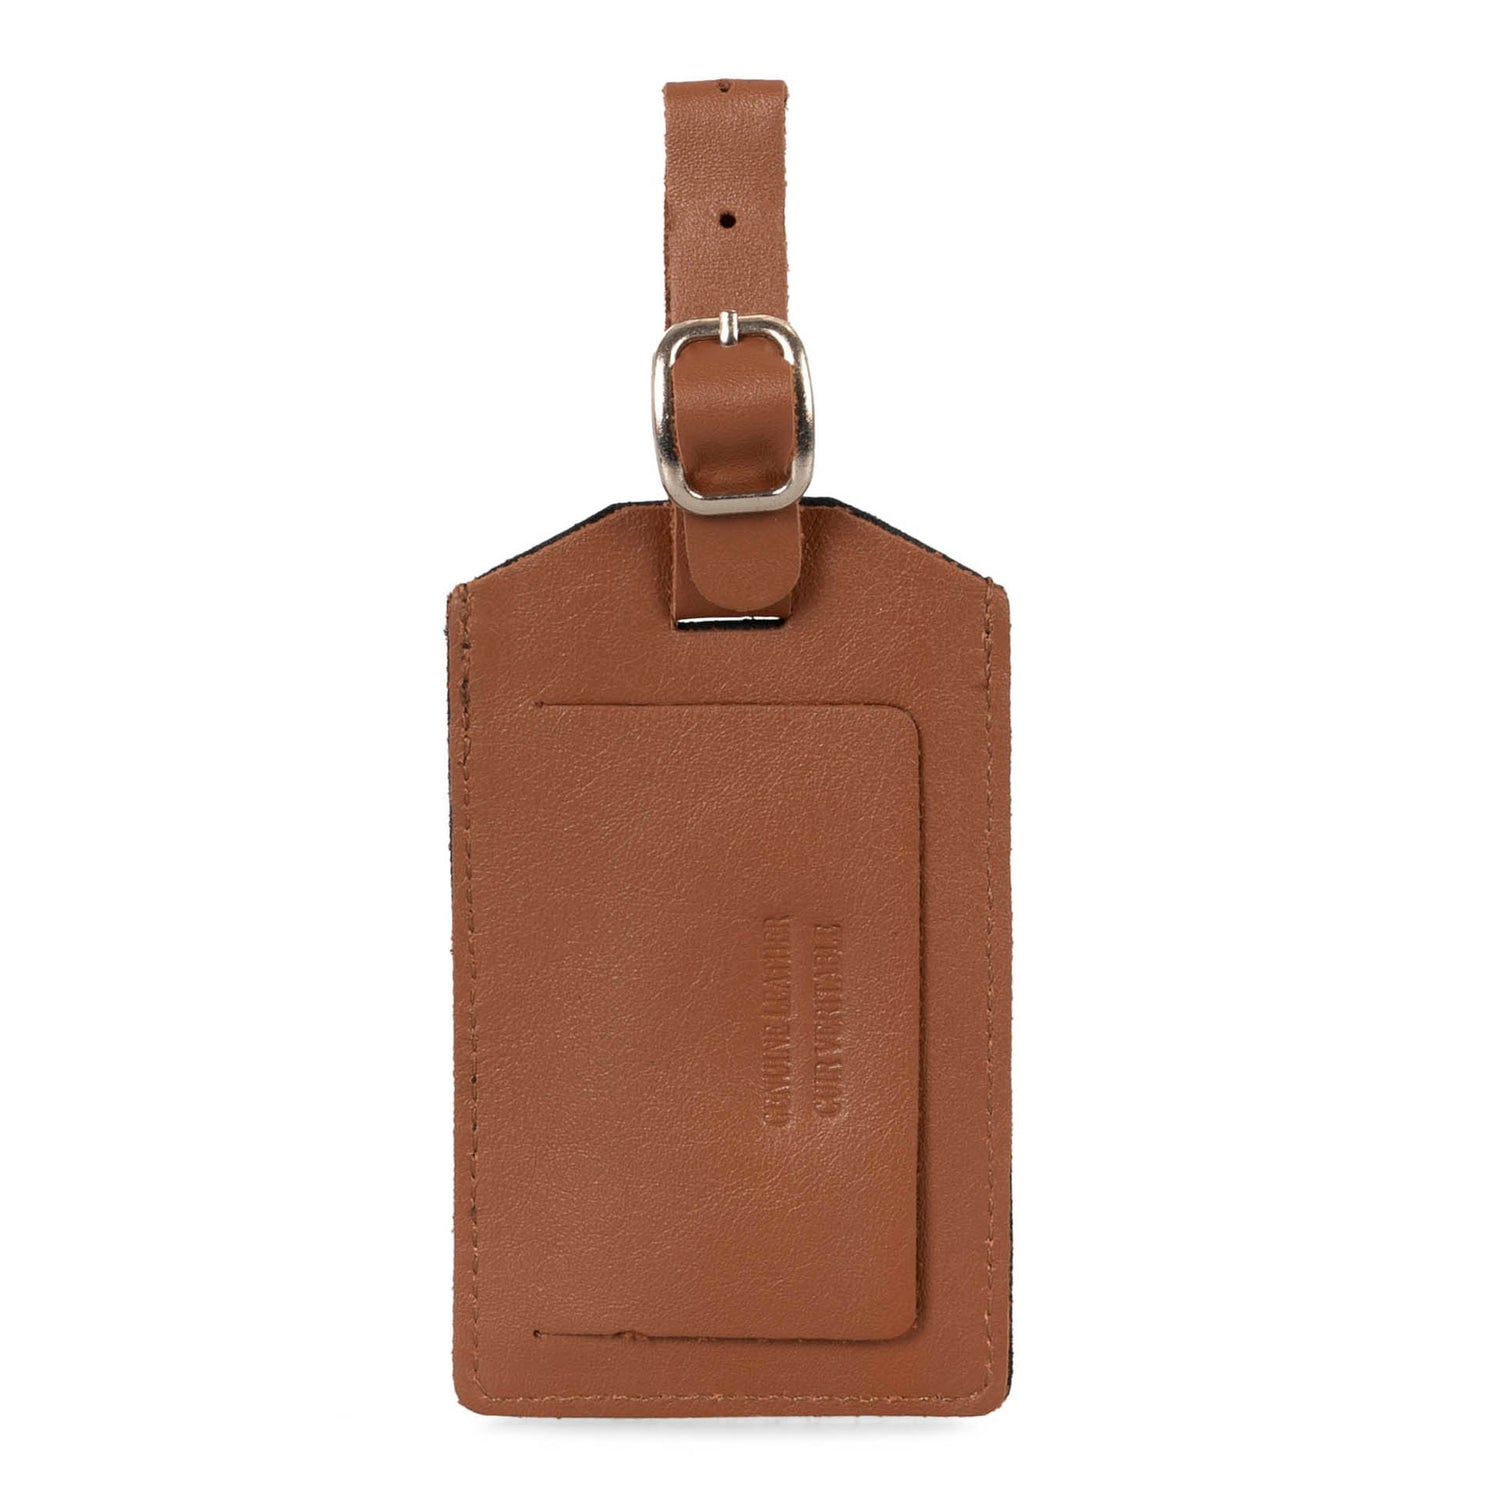 Front side of a brown leather luggage tag designed by Tracker showing its supple texture and brown strap.